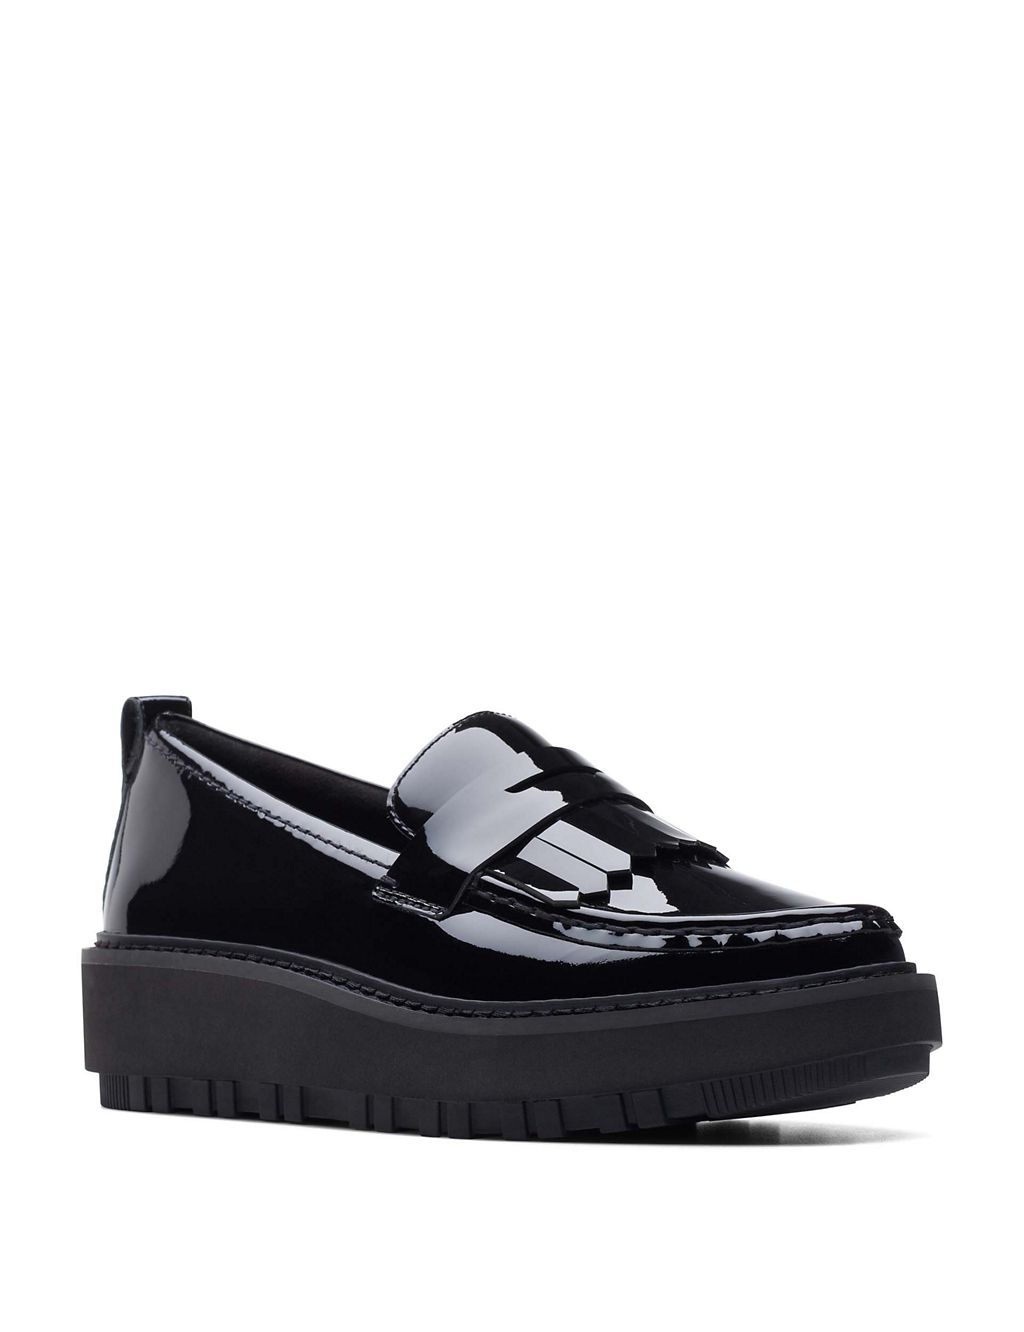 Leather Patent Flatform Loafers 1 of 7